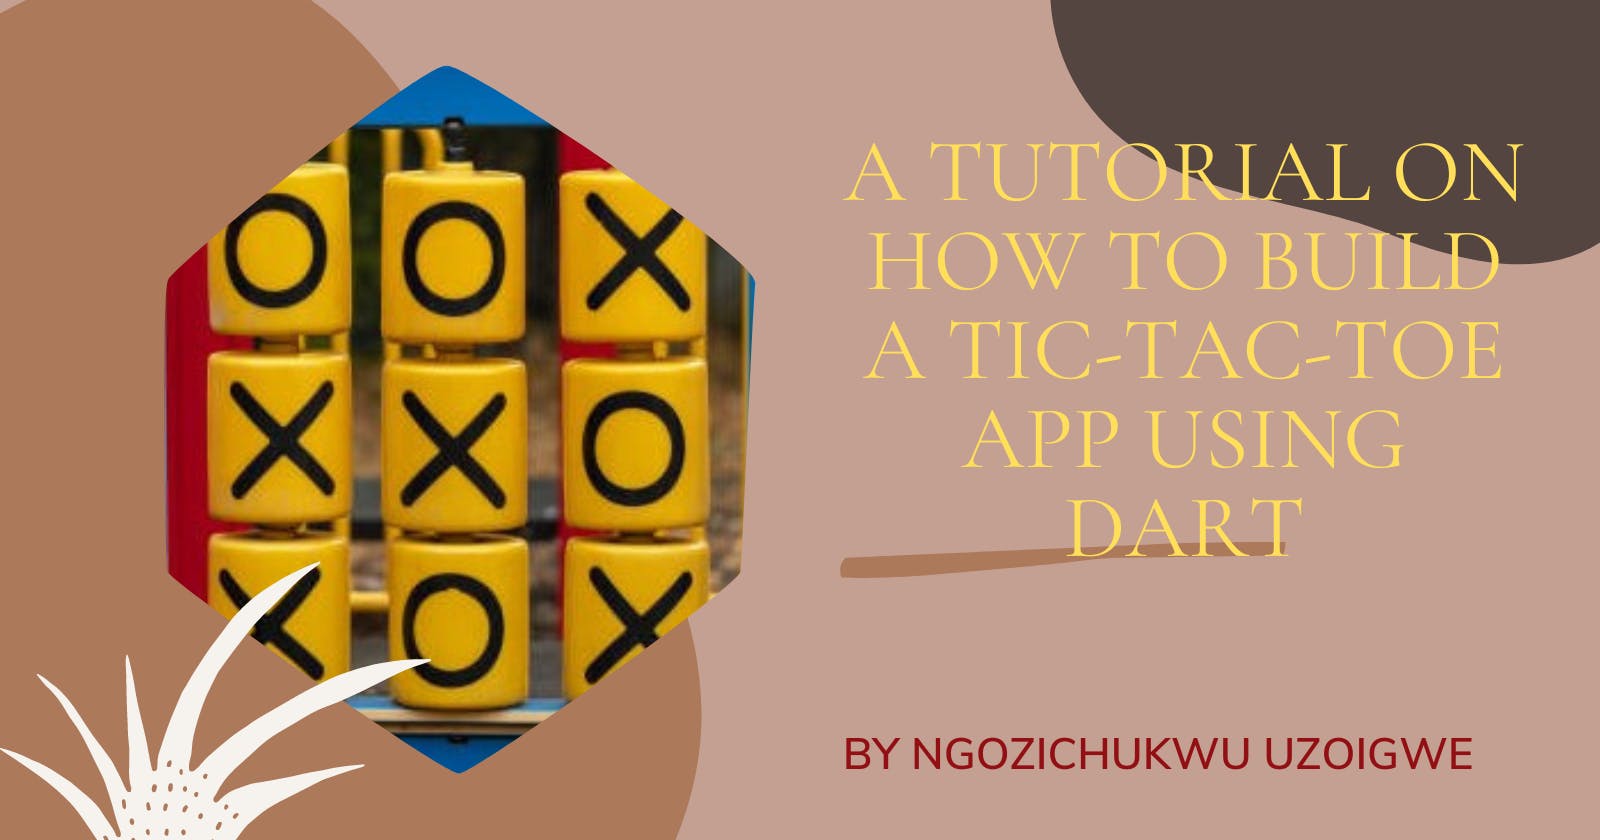 Tutorial On How To Build A Tic-tac-toe App Using Dart